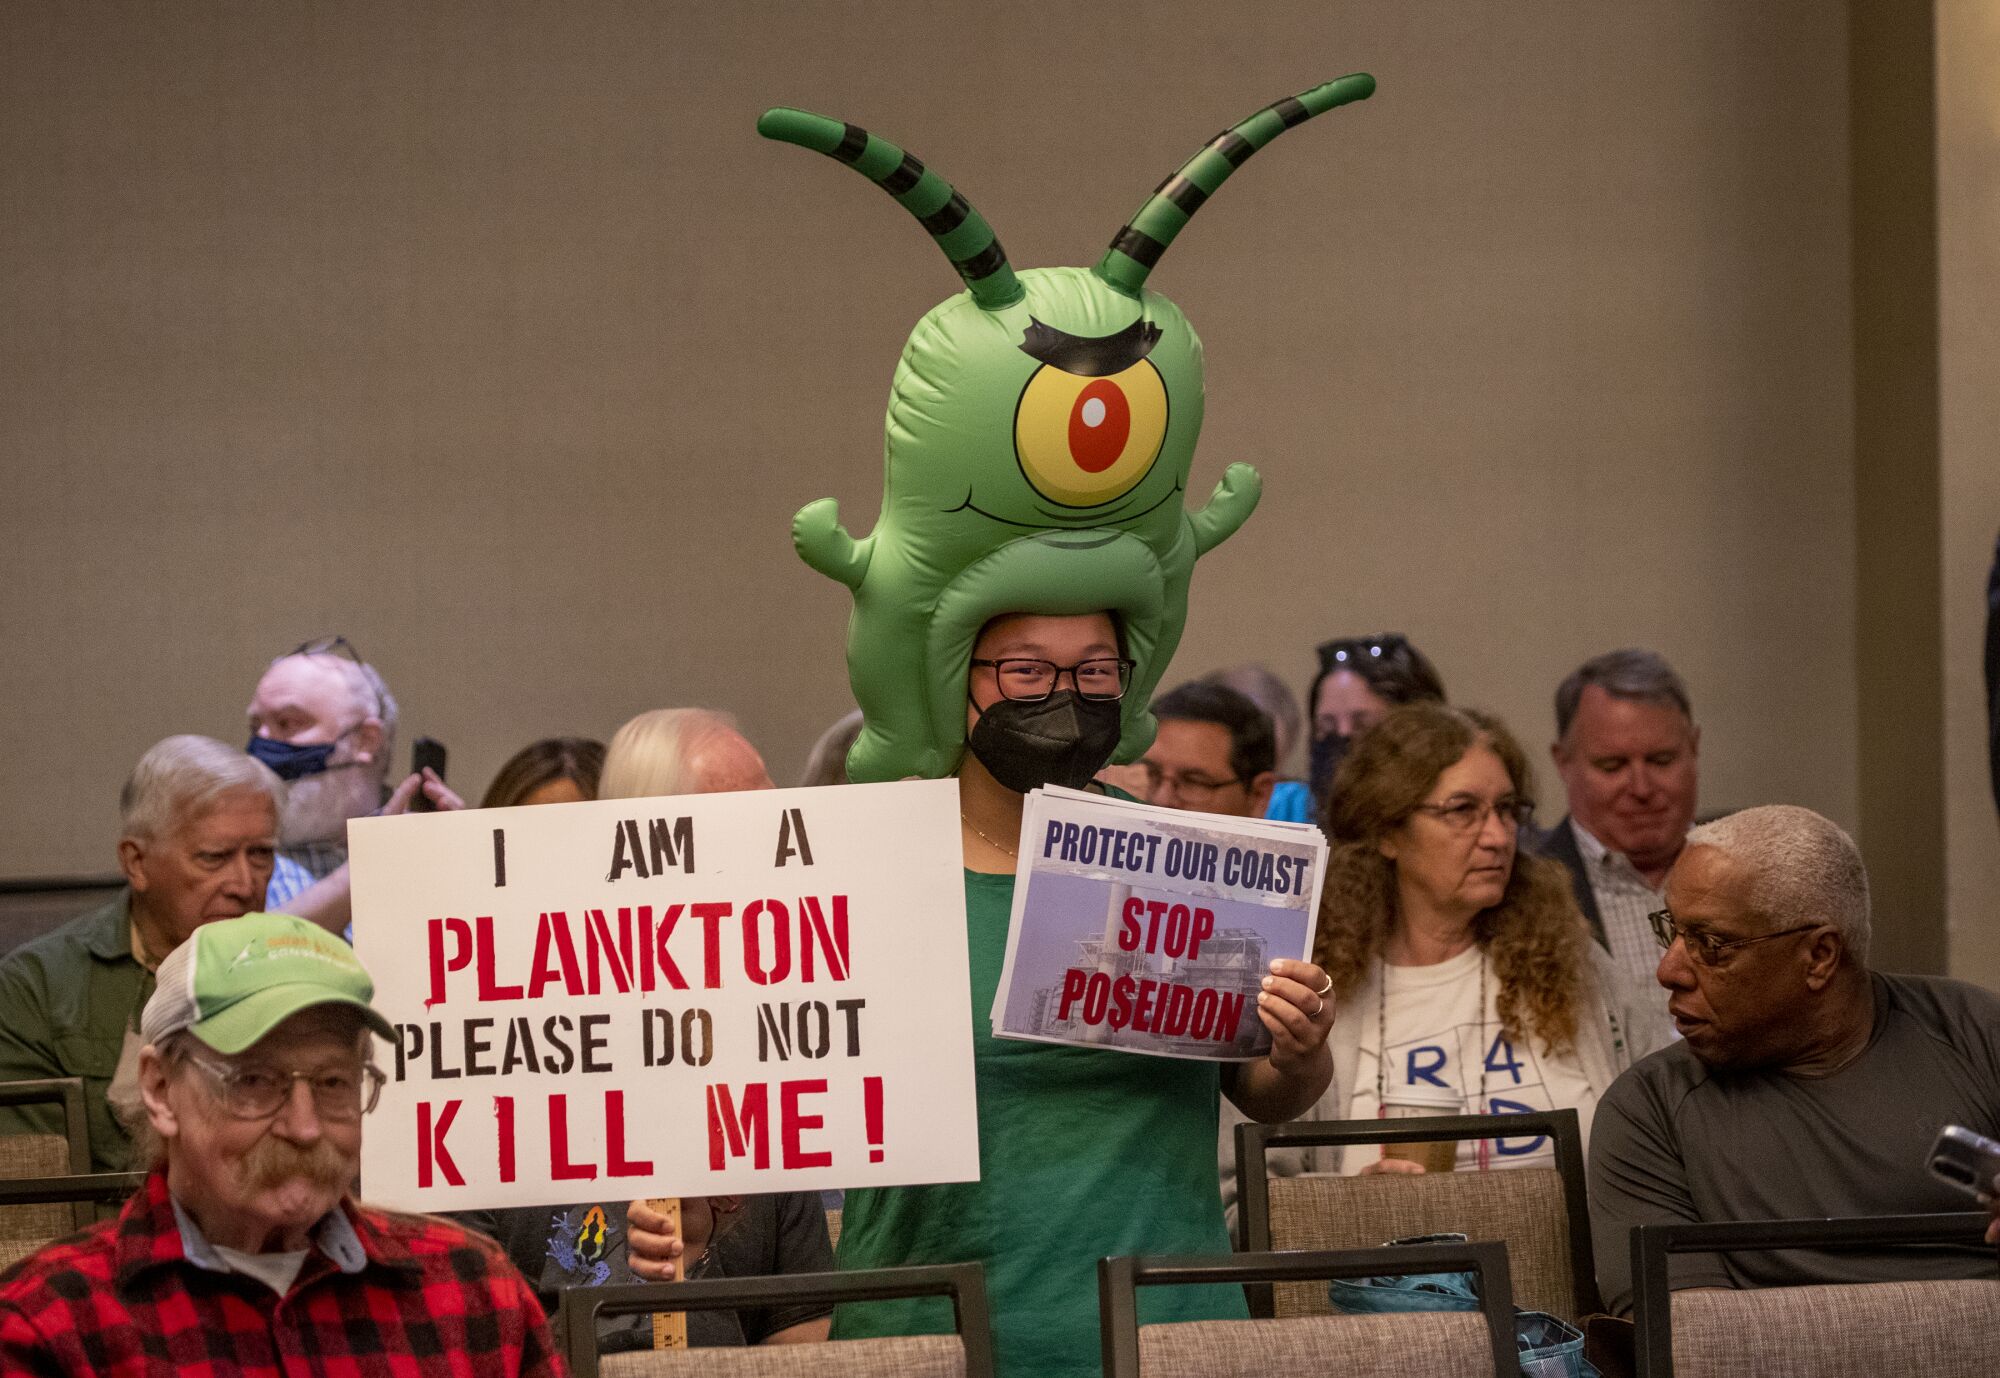 Zoey Lambe-Hommel attends the California Coastal Commission hearing in Costa Mesa, where the project was rejected.